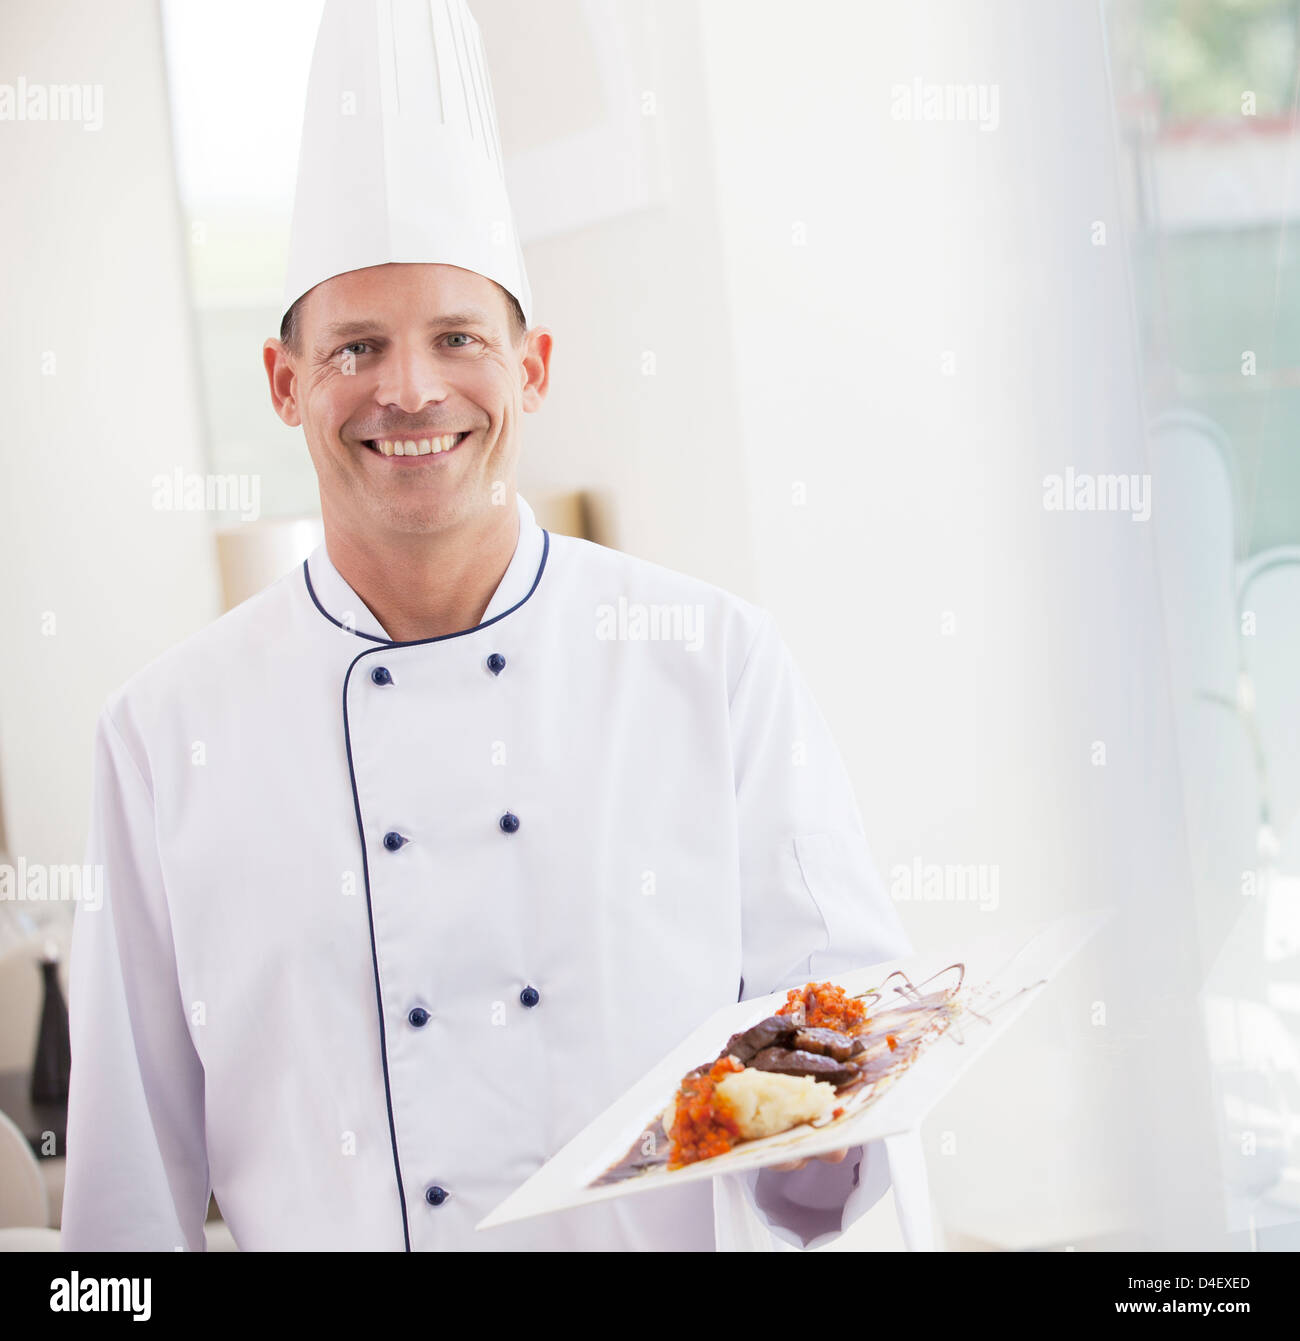 Chef carrying plate of food in restaurant Stock Photo